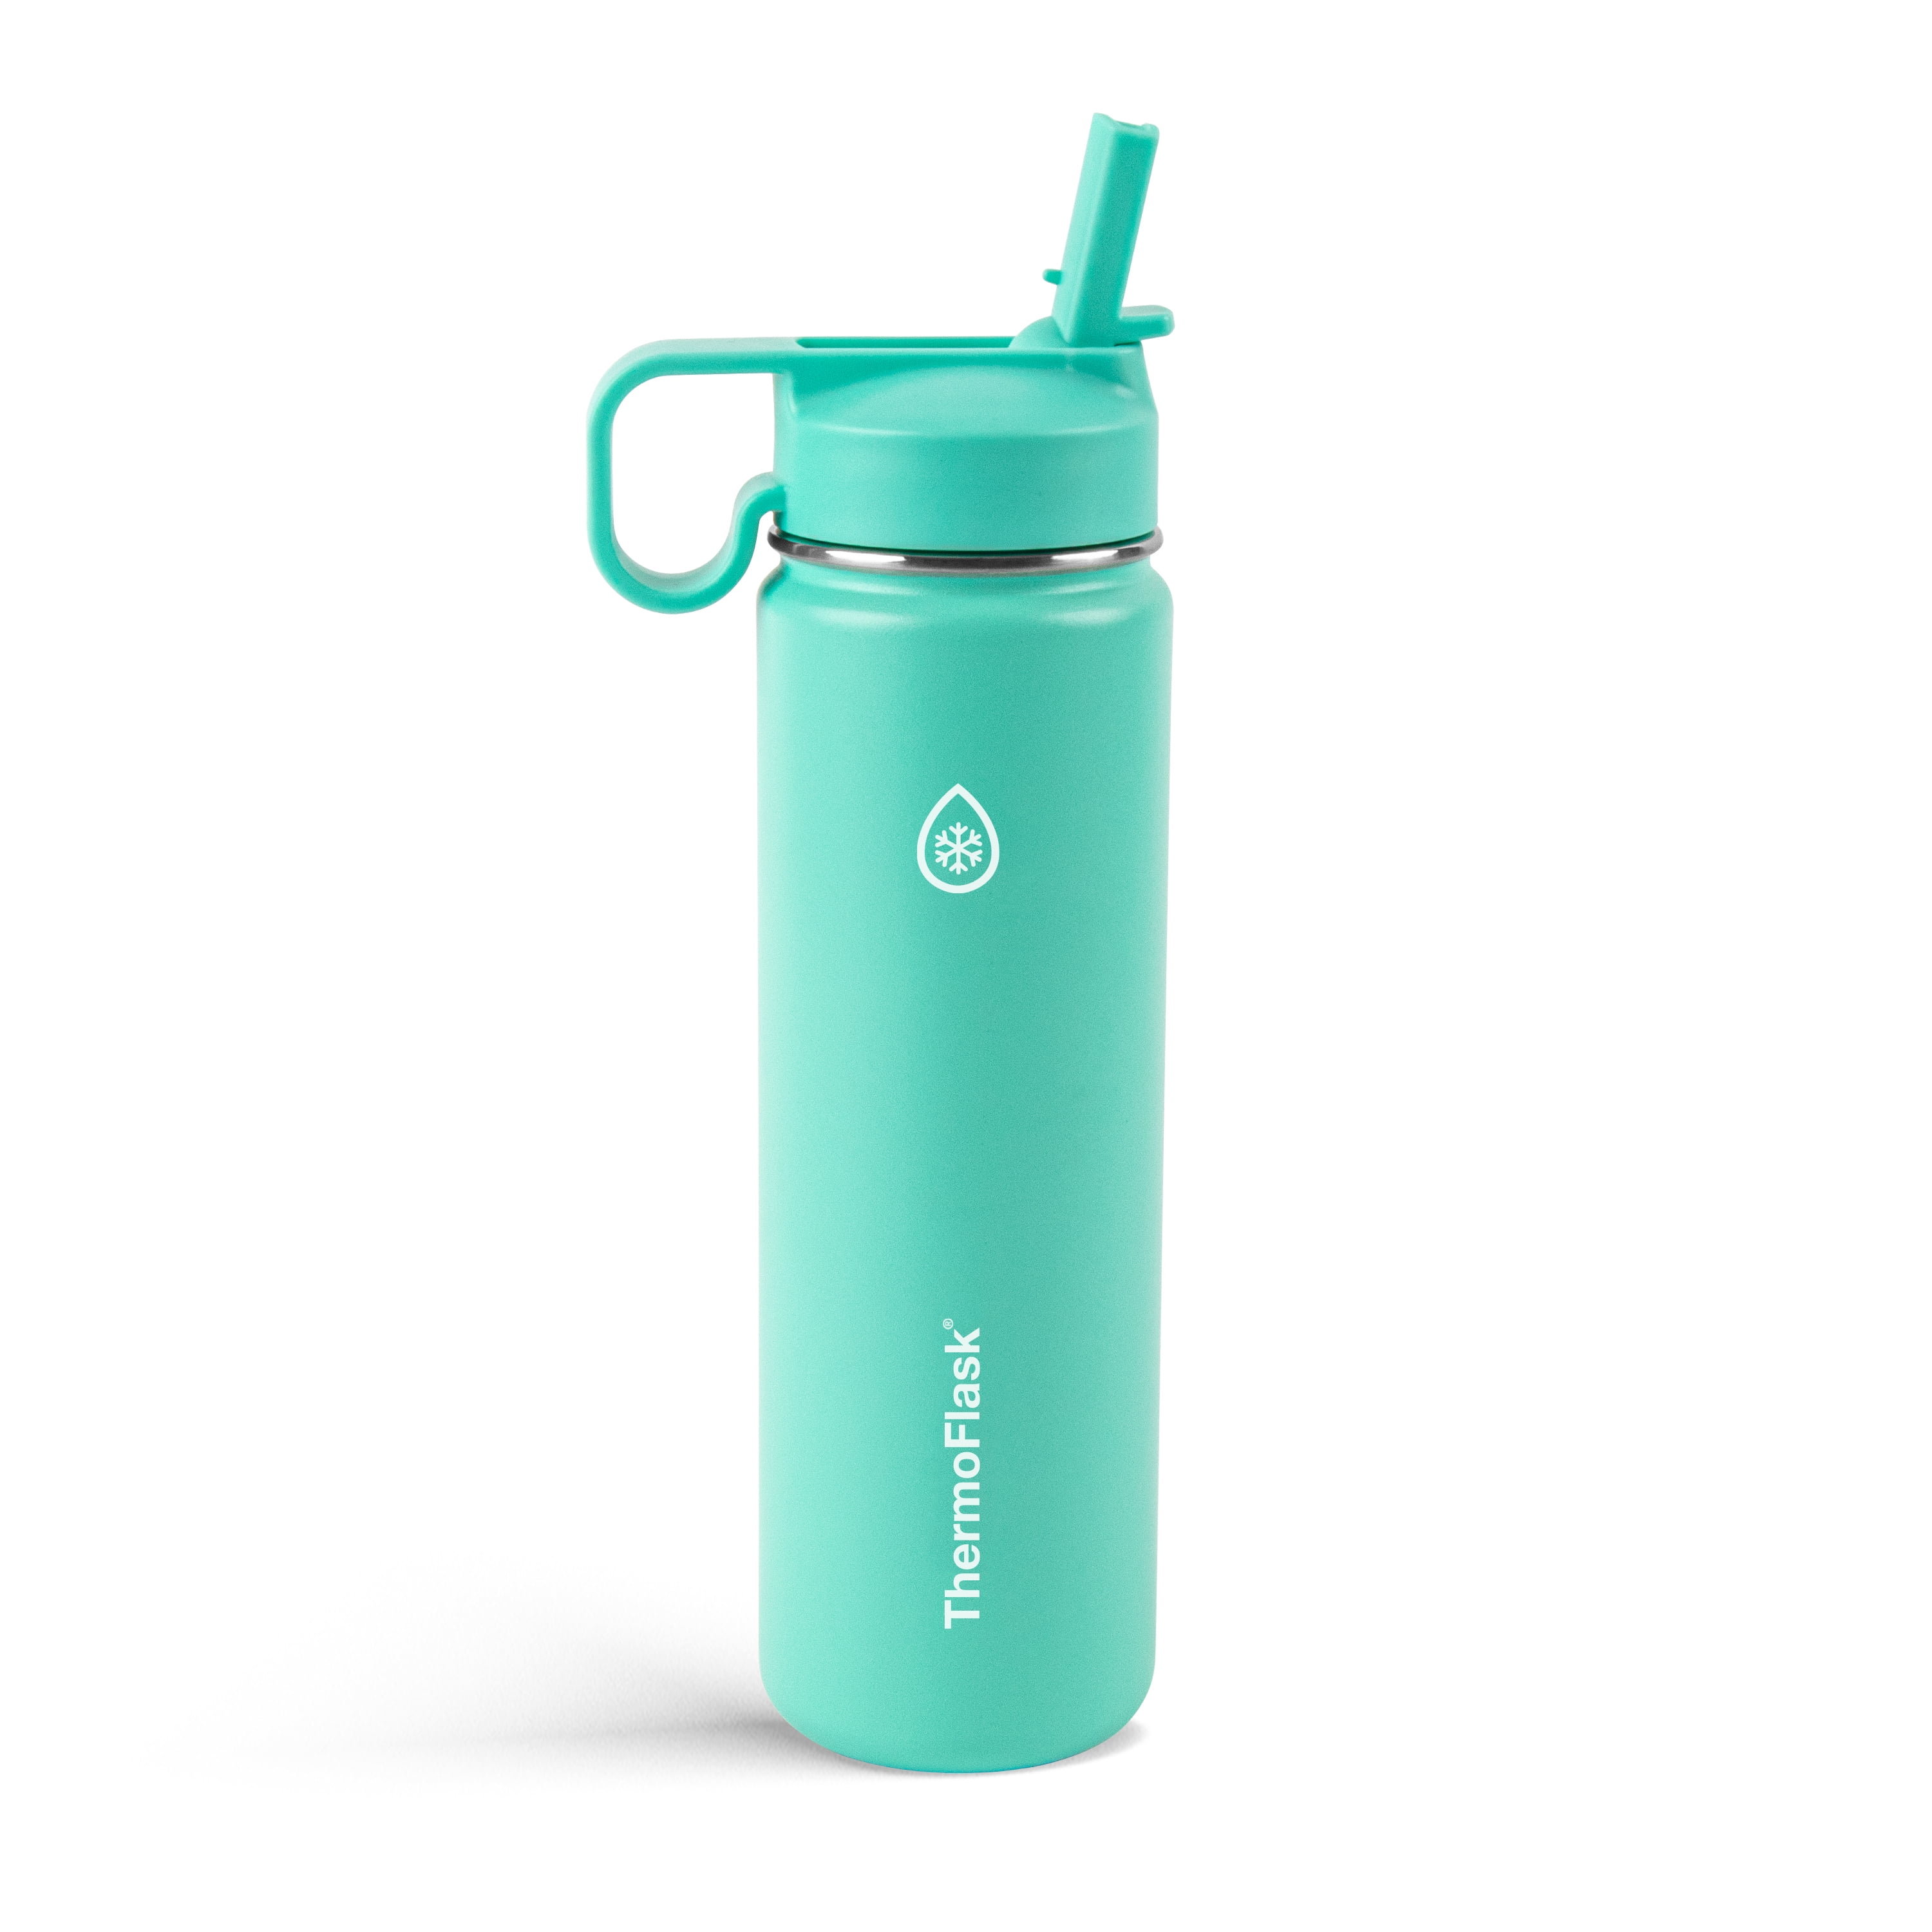 ThermoFlask 22 oz Insulated Stainless Steel Straw Water Bottle, Peaceful 